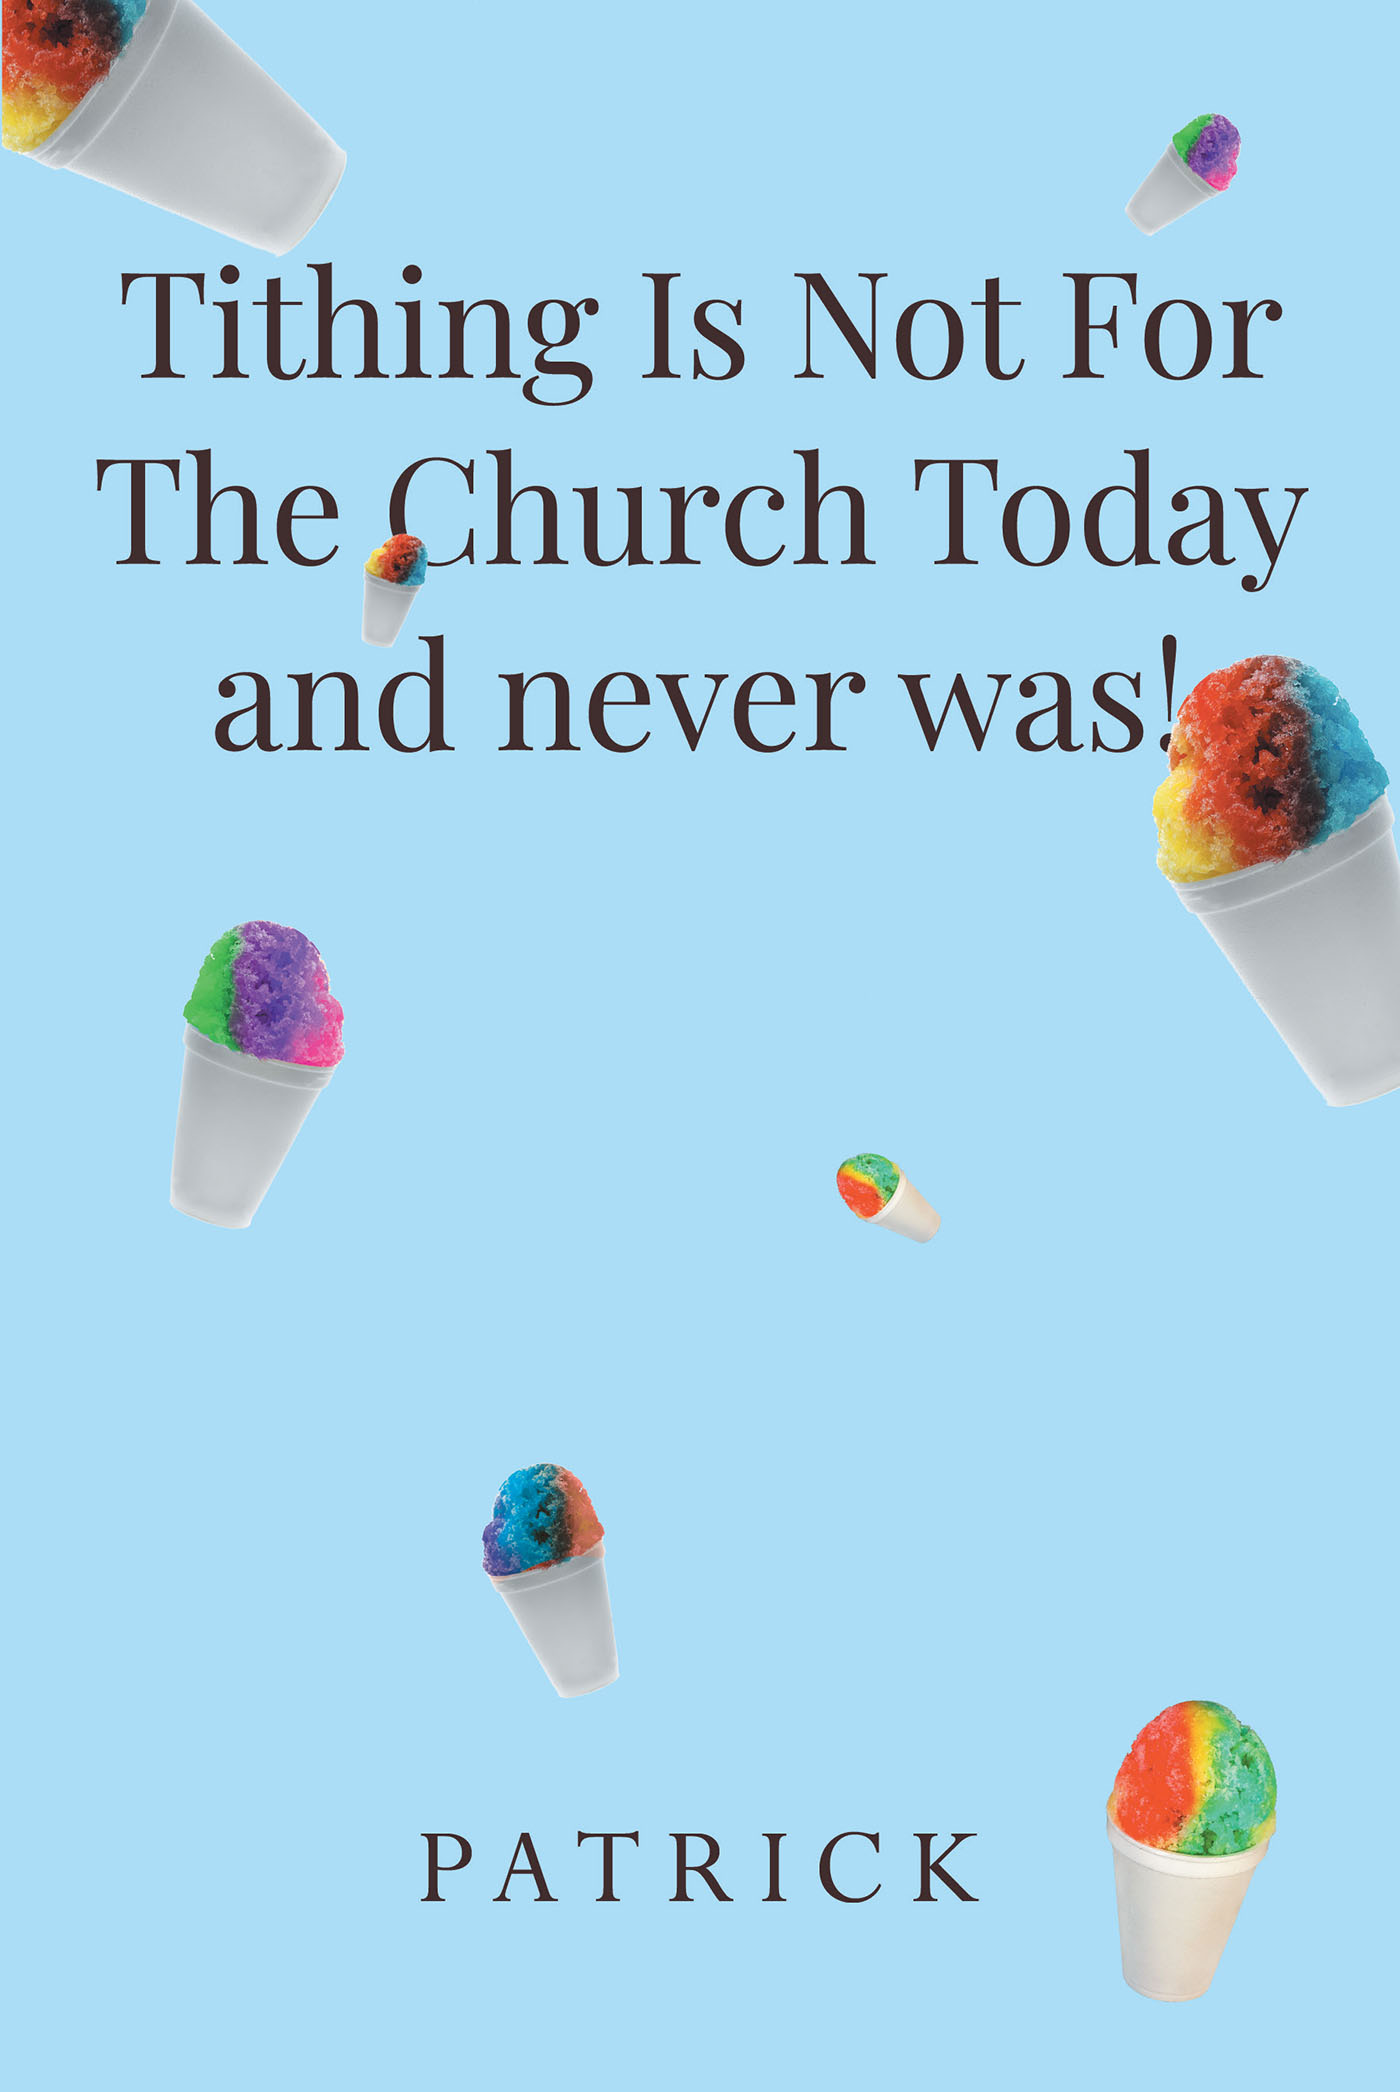 Author Patrick’s New Book, “Tithing Is Not For The Church Today and never was!” is a Unique Look at How Modern Church Dogma Has Drifted Away from God’s Initial Intentions